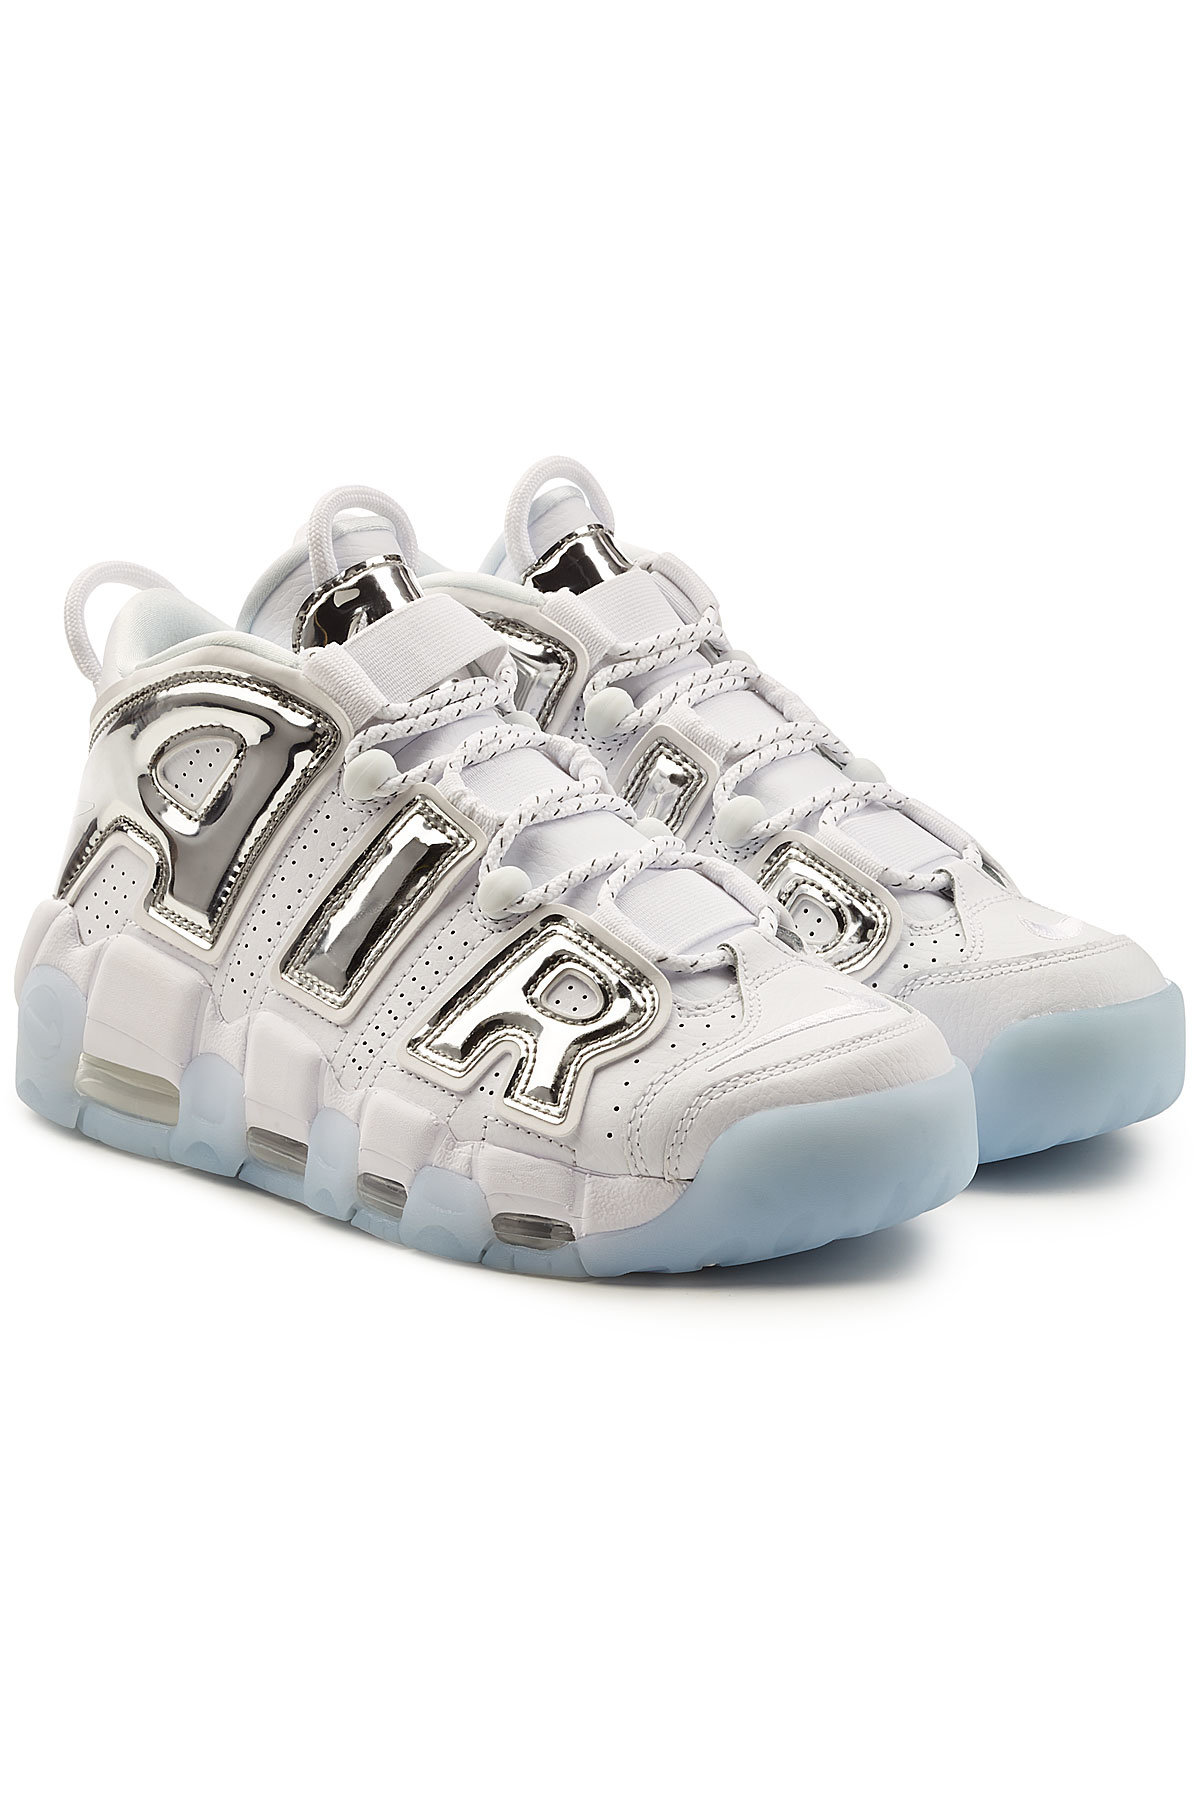 Nike - Air More Uptempo Leather Sneakers